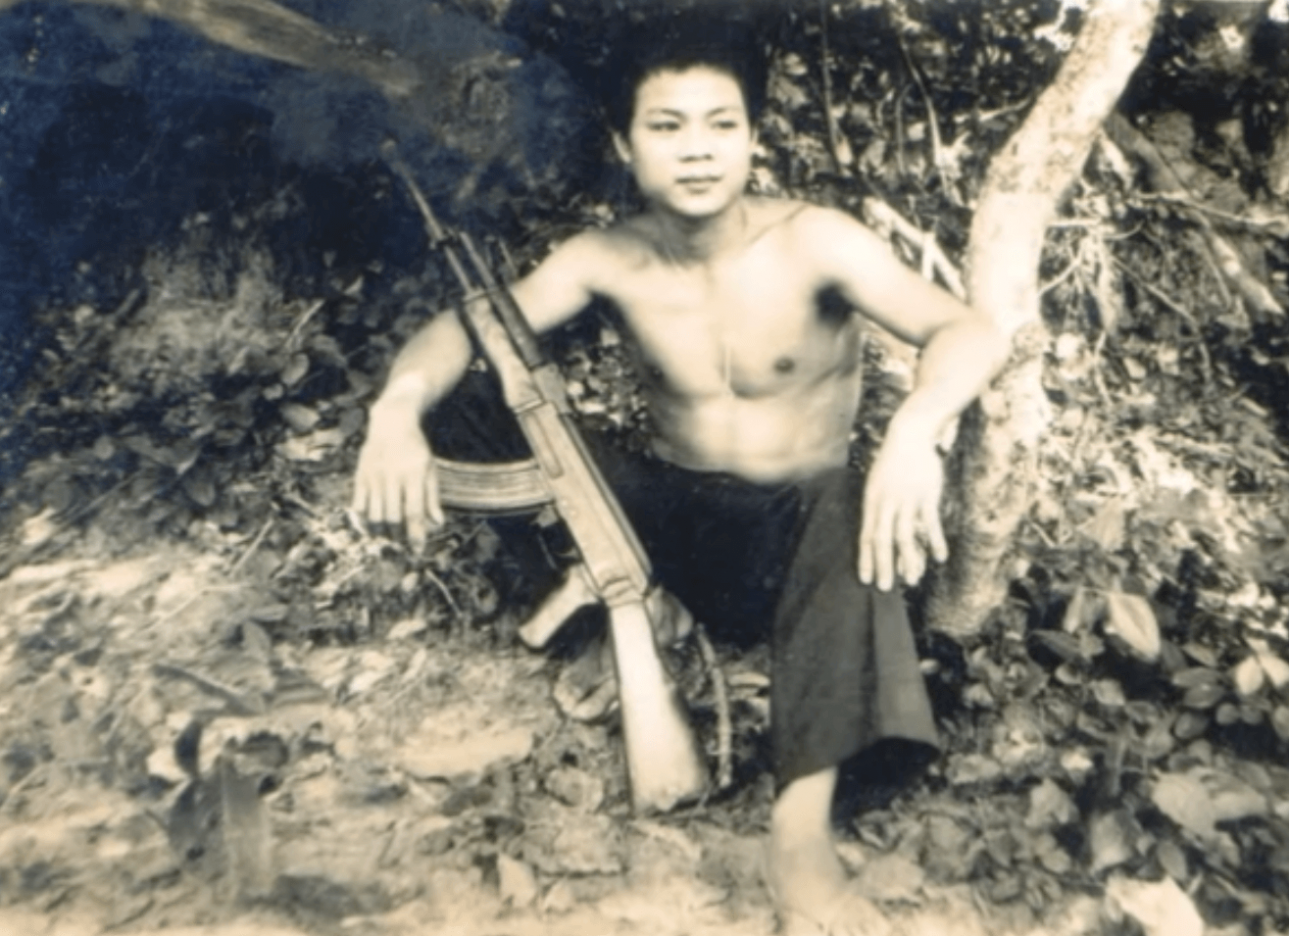 A young Asian soldier, shirtless and in flip flops, sitting down with a rifle propped in his lap.